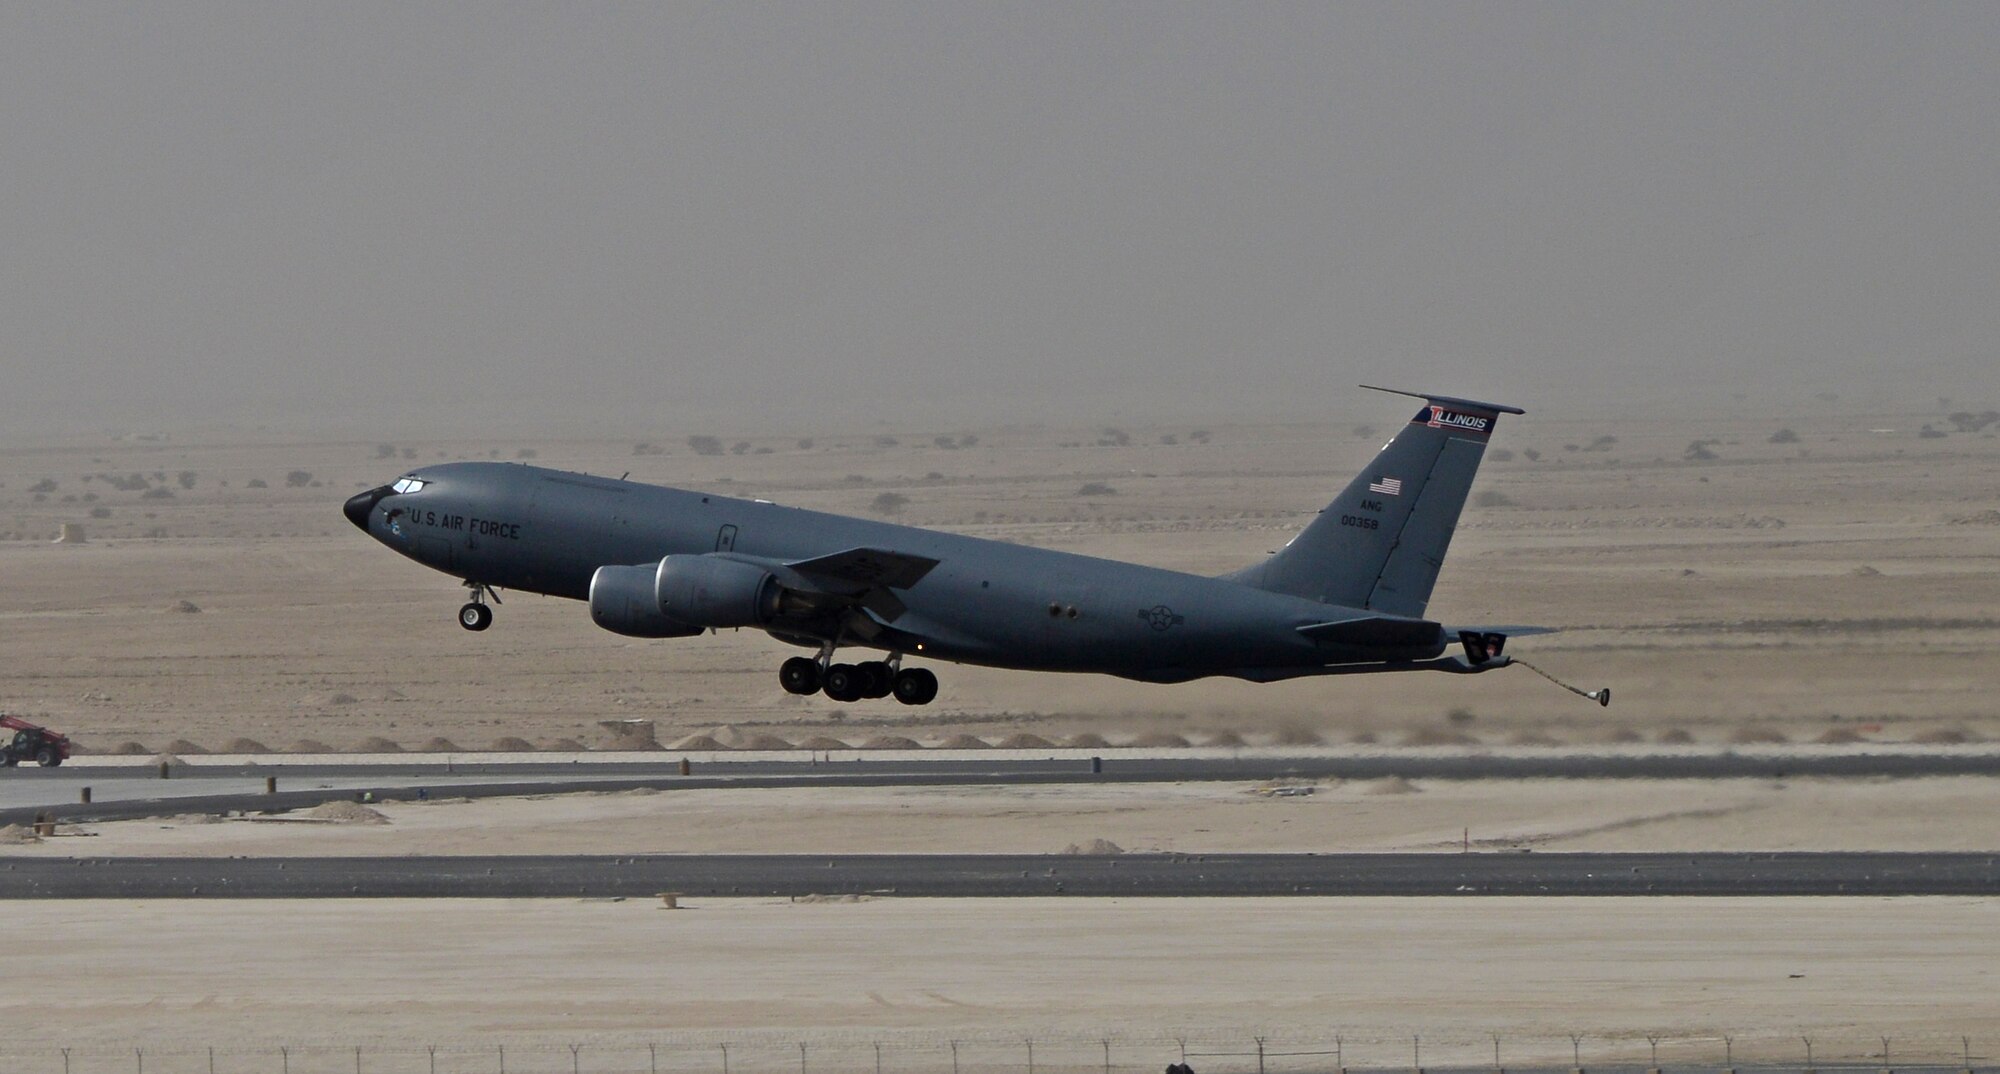 A KC-135 Stratotankers takes-off from the flightline, Feb. 18, 2015, at Al Udeid Air Base, Qatar. Air traffic controllers from the Qatar Emiri Air Force and 379th Expeditionary Operations Support Squadron provide air control support to all the aircraft assigned or transitioning through here. Some of the aircraft, controllers provide support to here are the KC-135 Stratotanker, C-17 Globemaster III, B-1 Lancer, RC-135 Rivet Joint, E-8 Joint STARS, Boeing 747, C-130 Hercules and C-21. (U.S. Air Force photo by Senior Airman Kia Atkins)